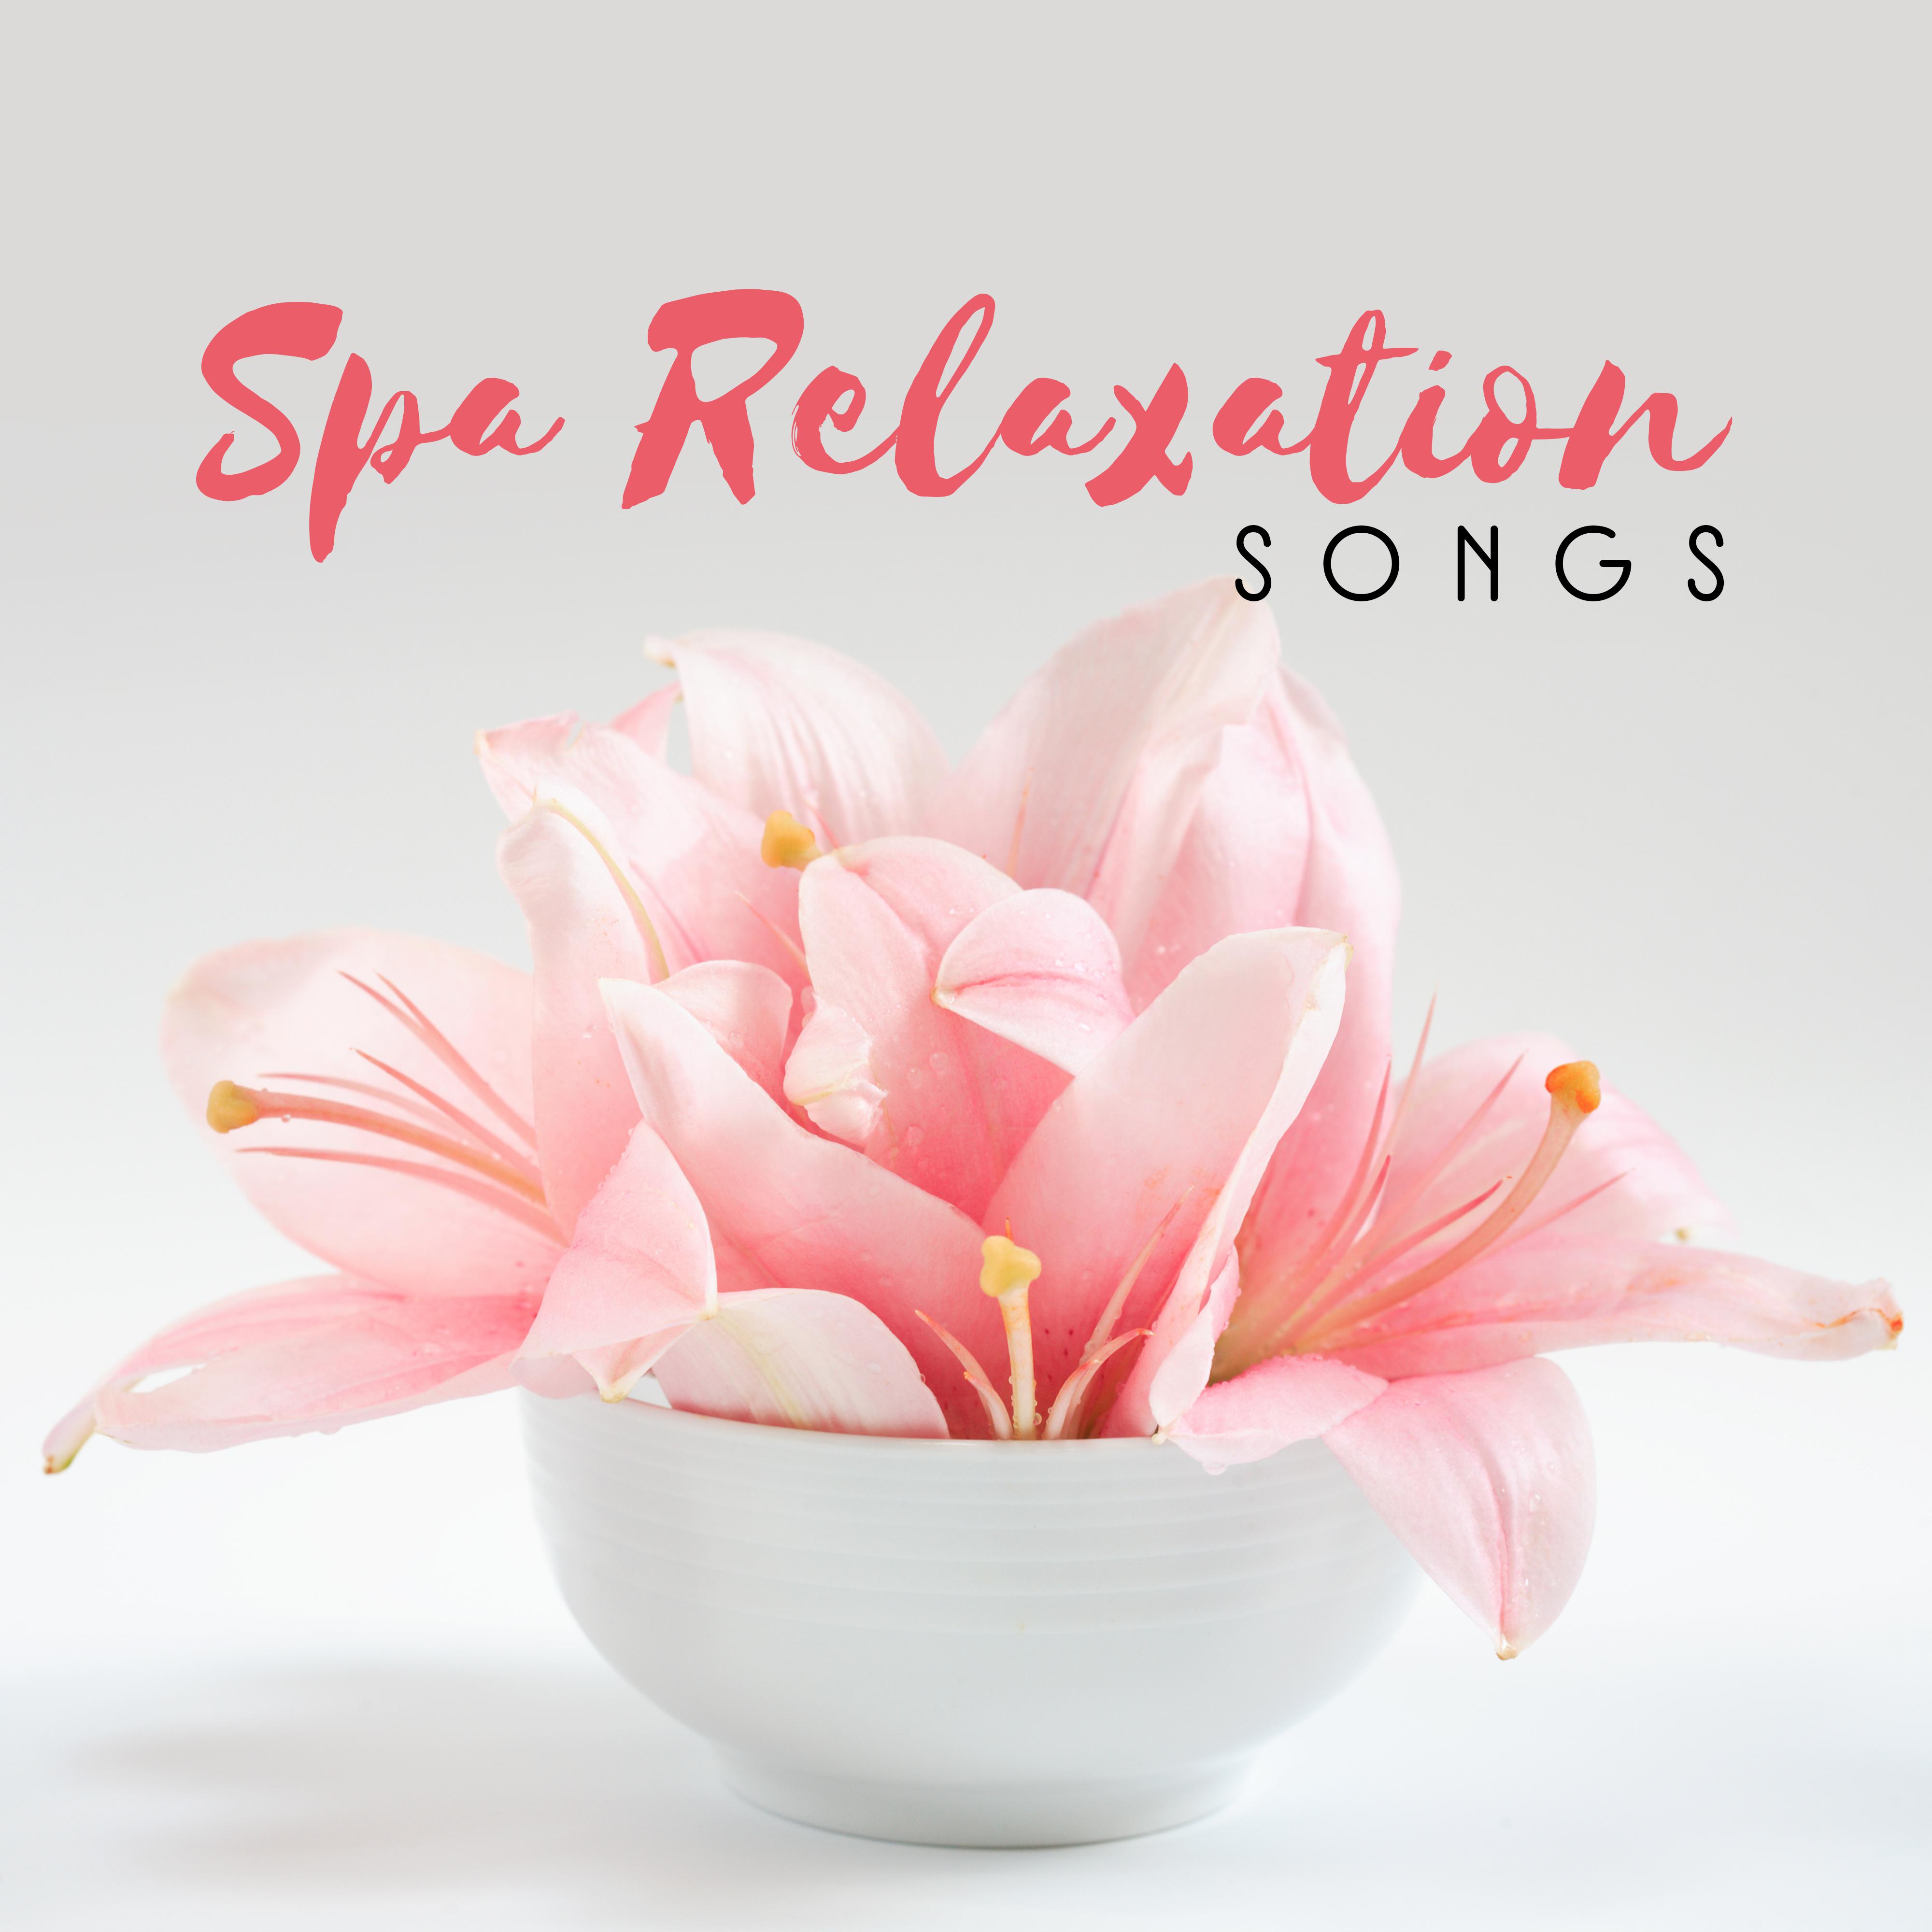 Spa Relaxation Songs